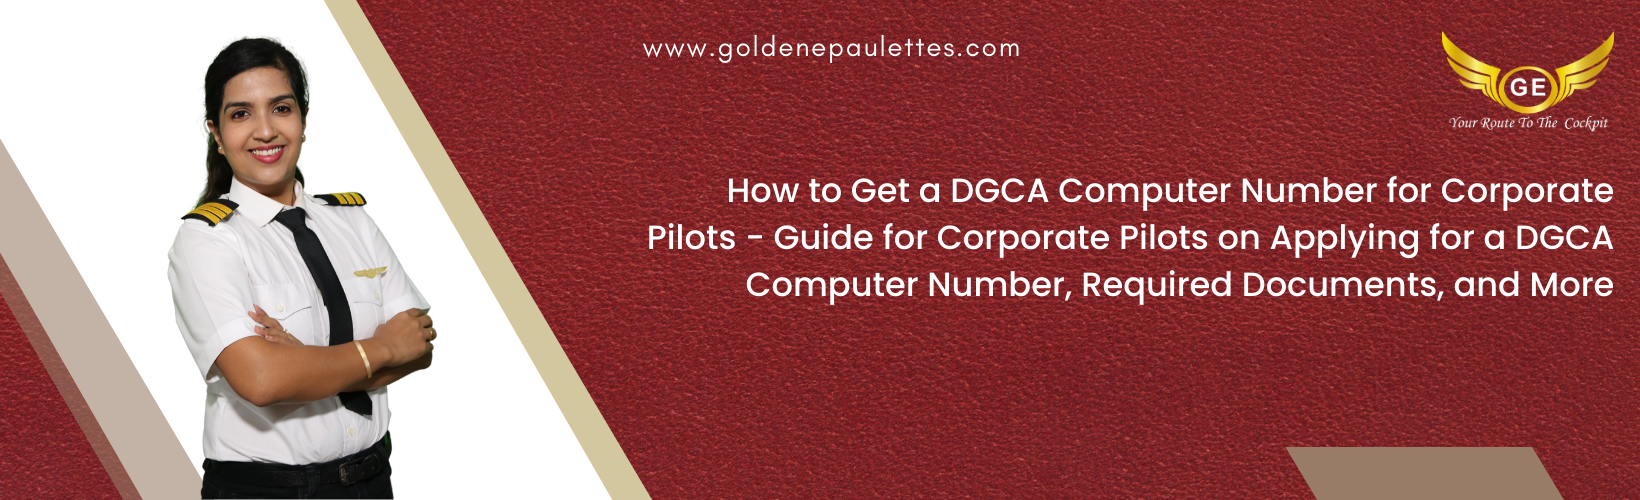 How to Obtain a DGCA Computer Number for Corporate Pilots